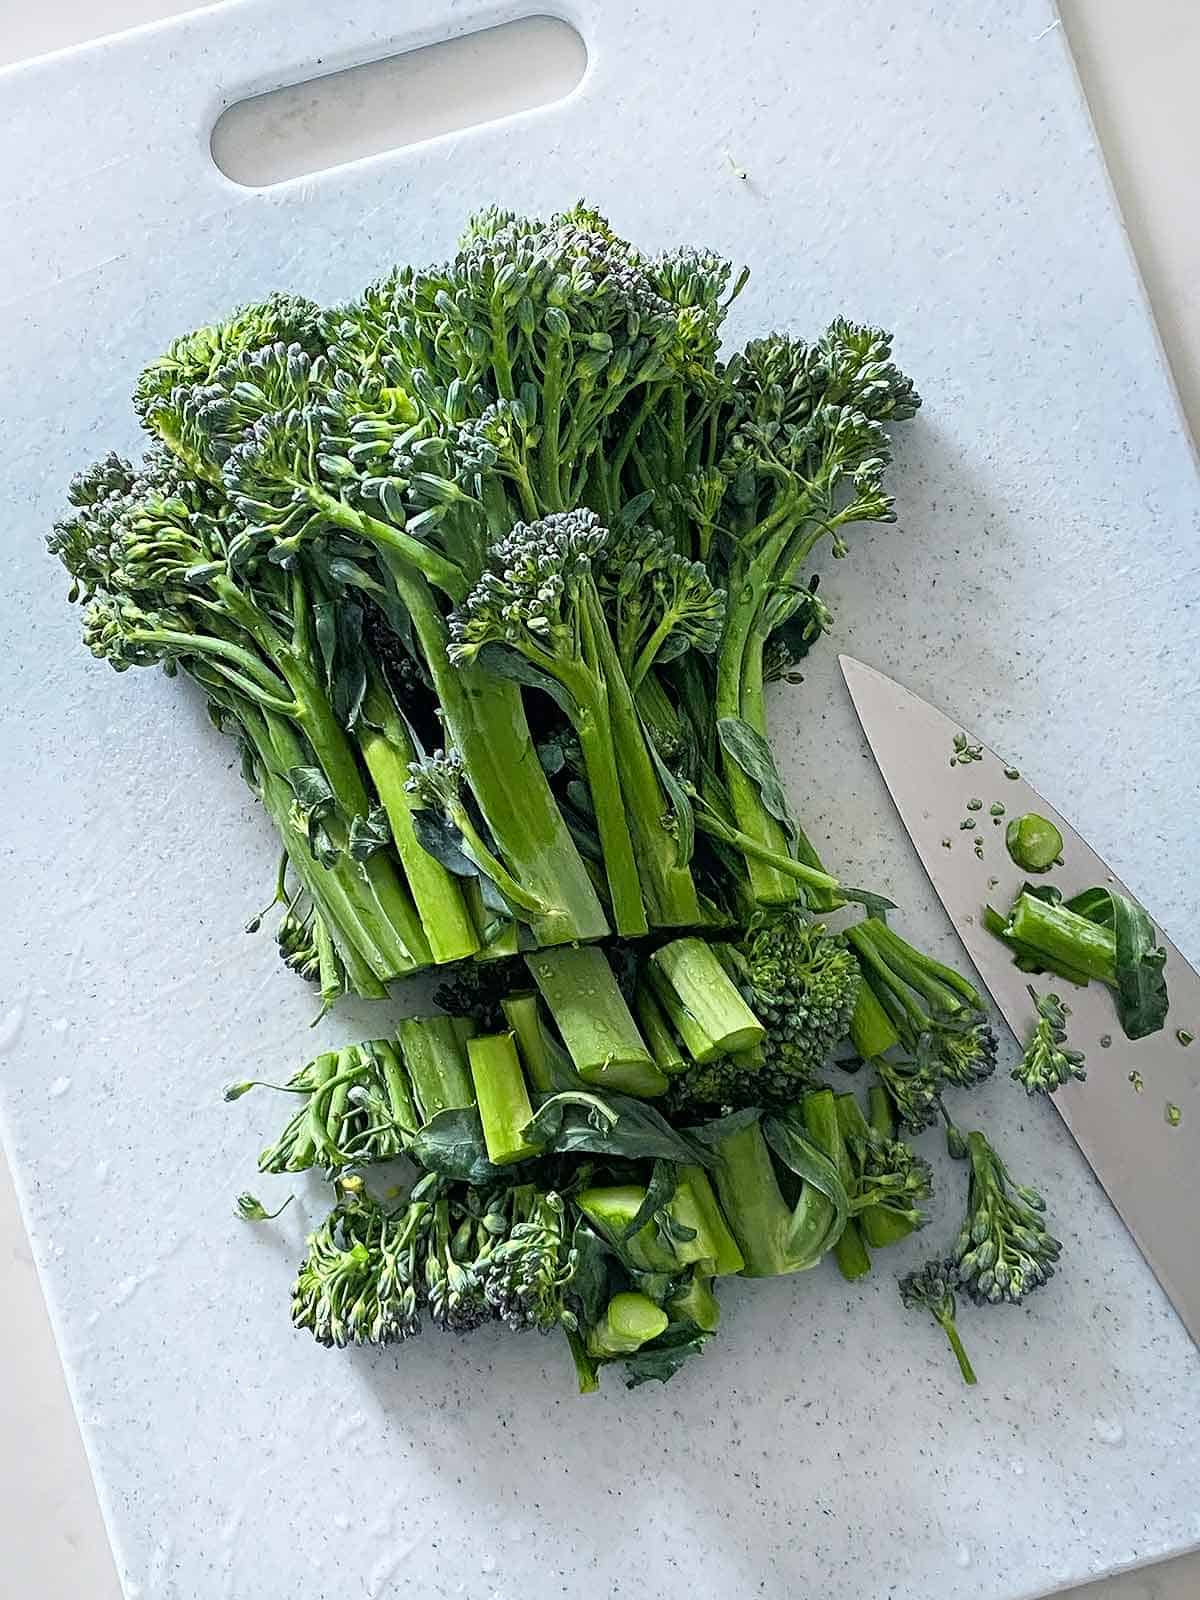 Broccolini chopped into one-half inch pieces on a cutting board.